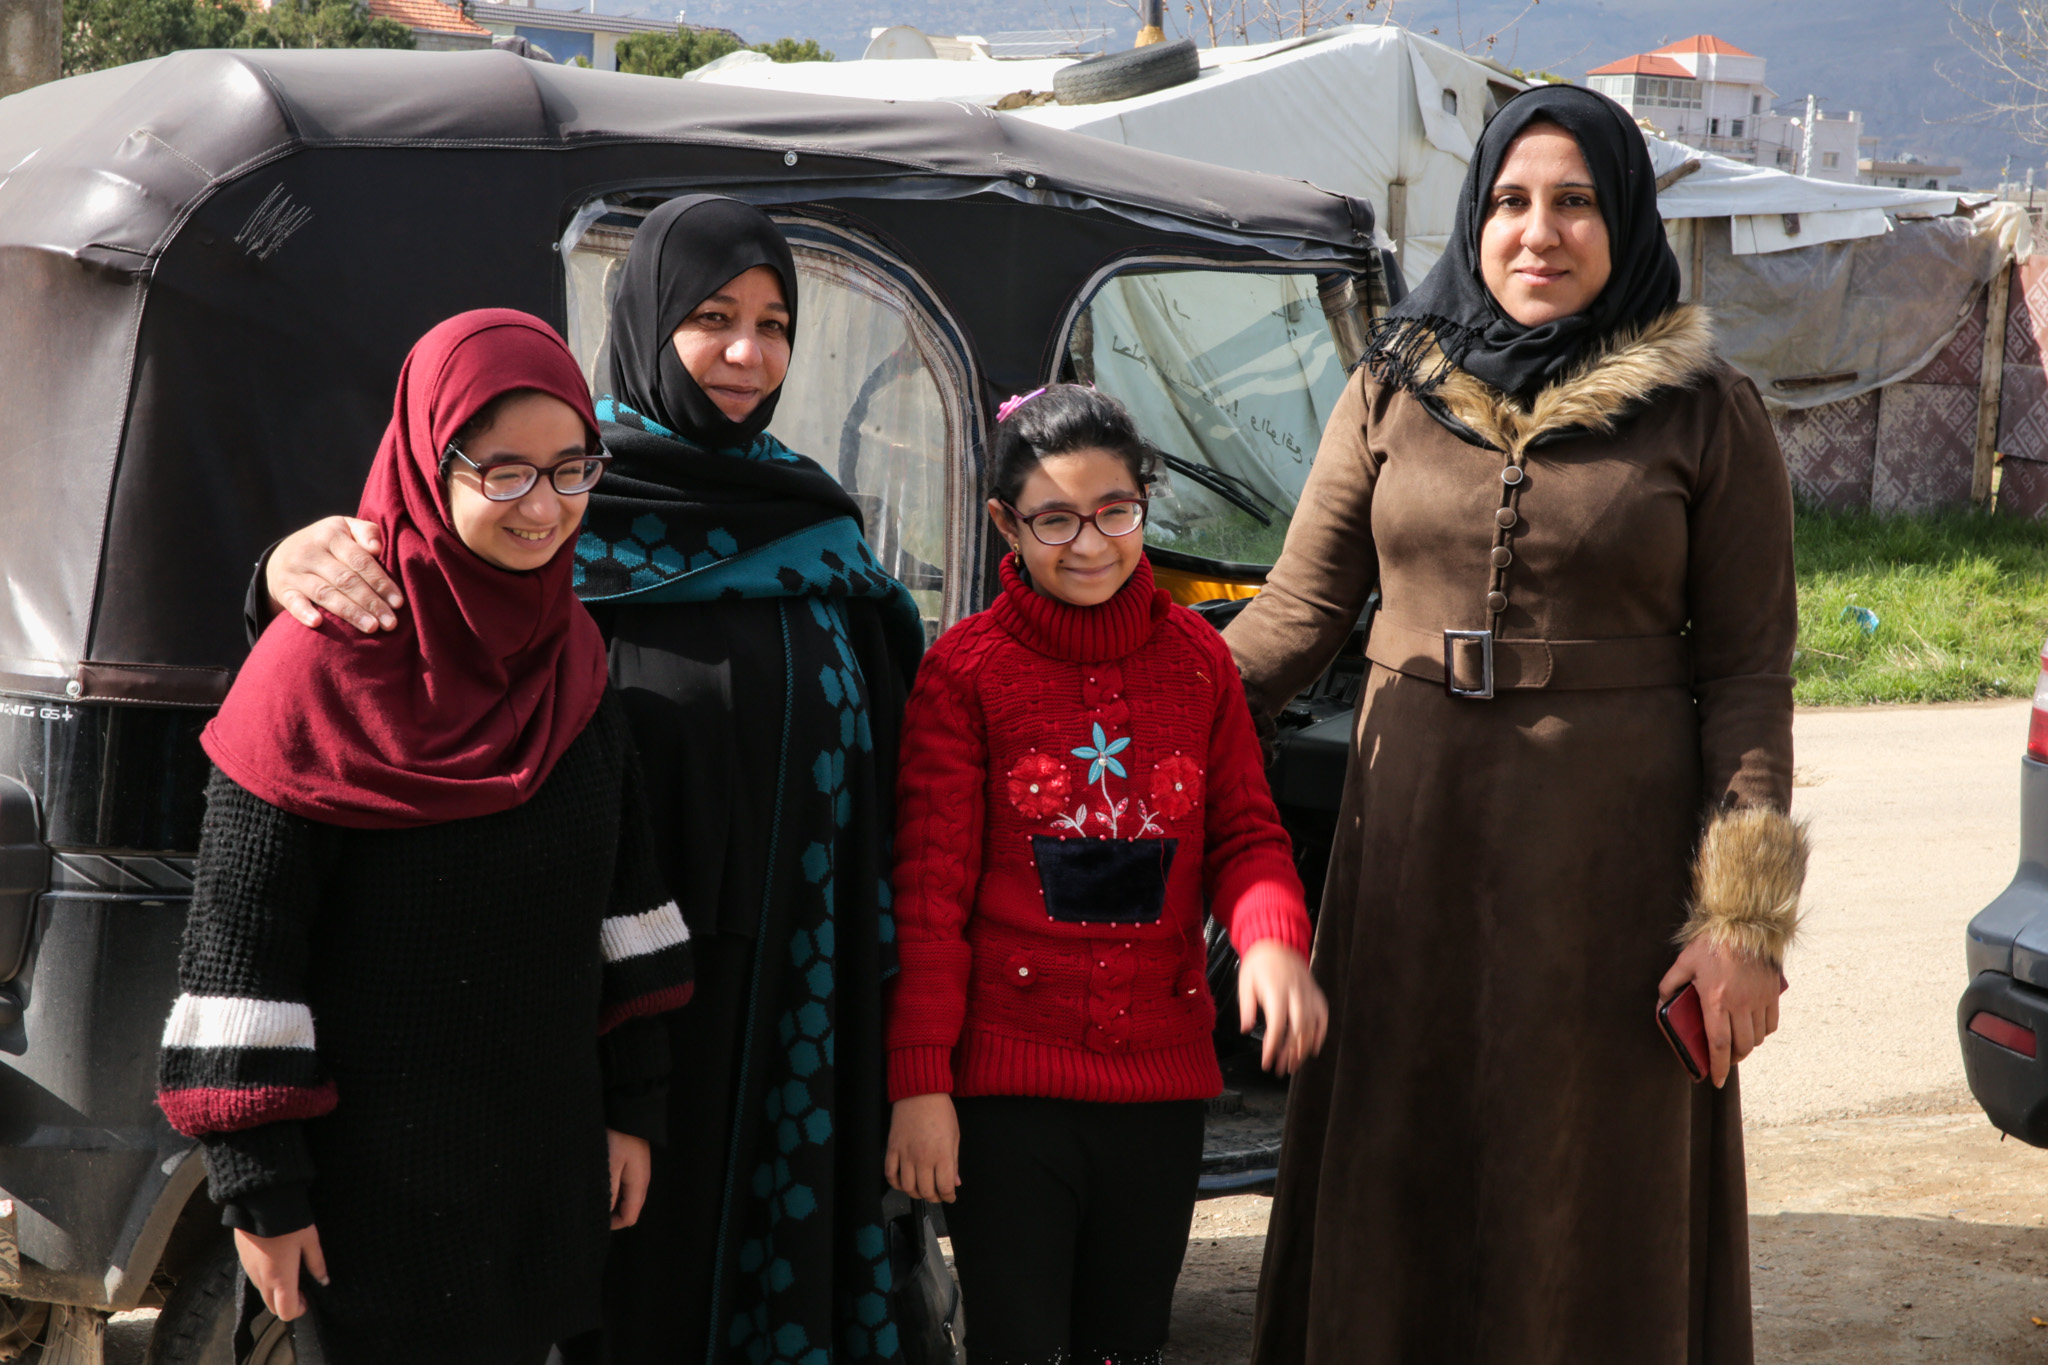 Group of four people smiling, standing in front of tents. From left to right: young girl wearing red head covering and glasses; a woman wearing a black head scarf; a young girl wearing a red sweater and glasses; and a woman wearing a black head scarf and long brown coat.